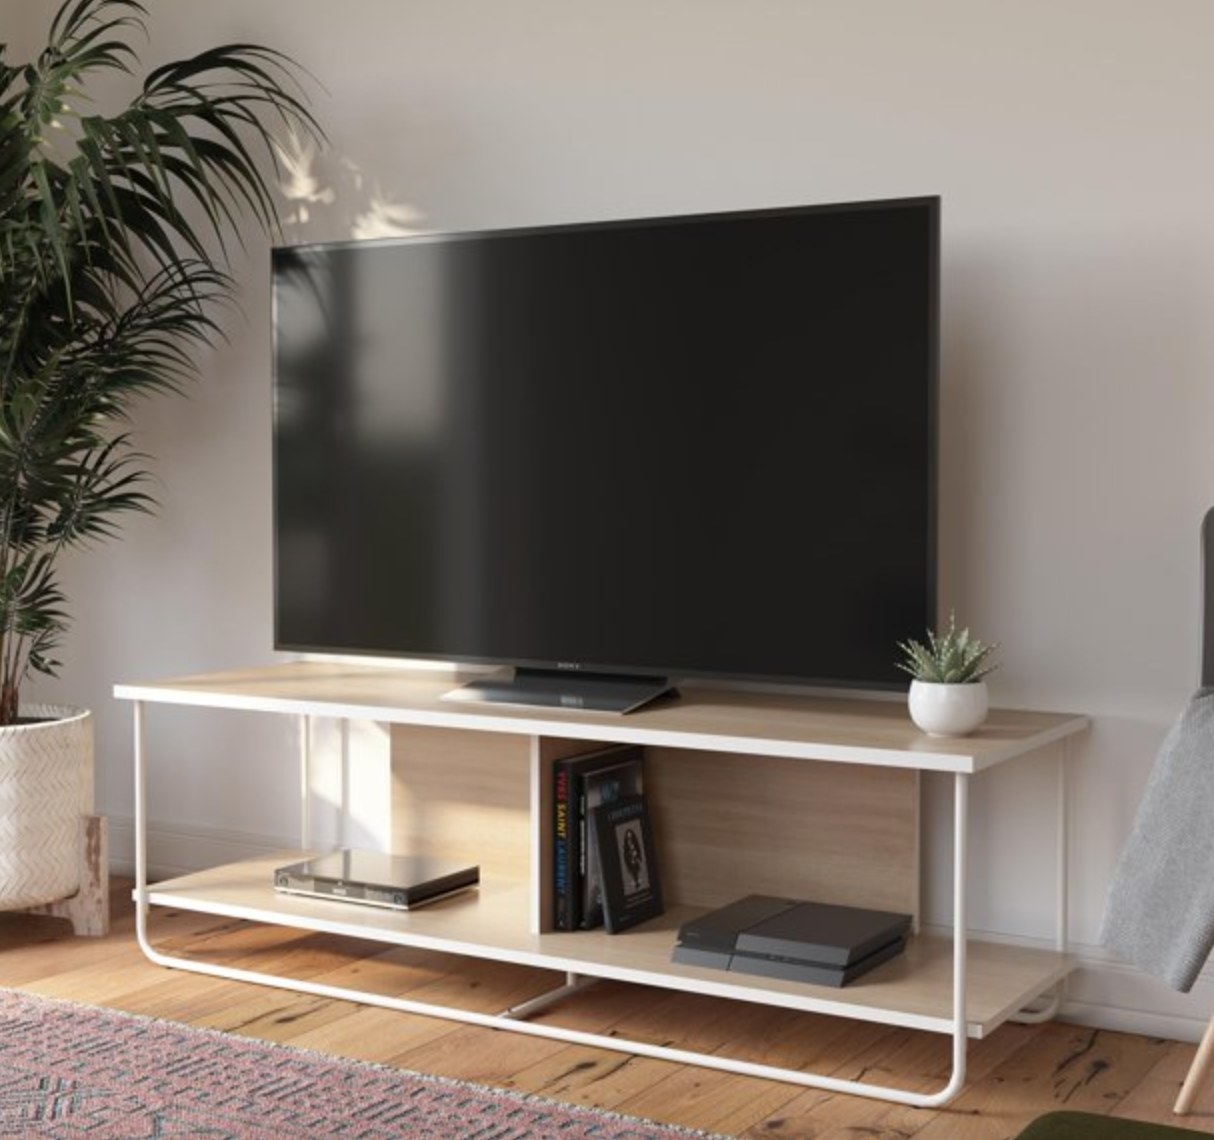 the natural wood and white TV stand